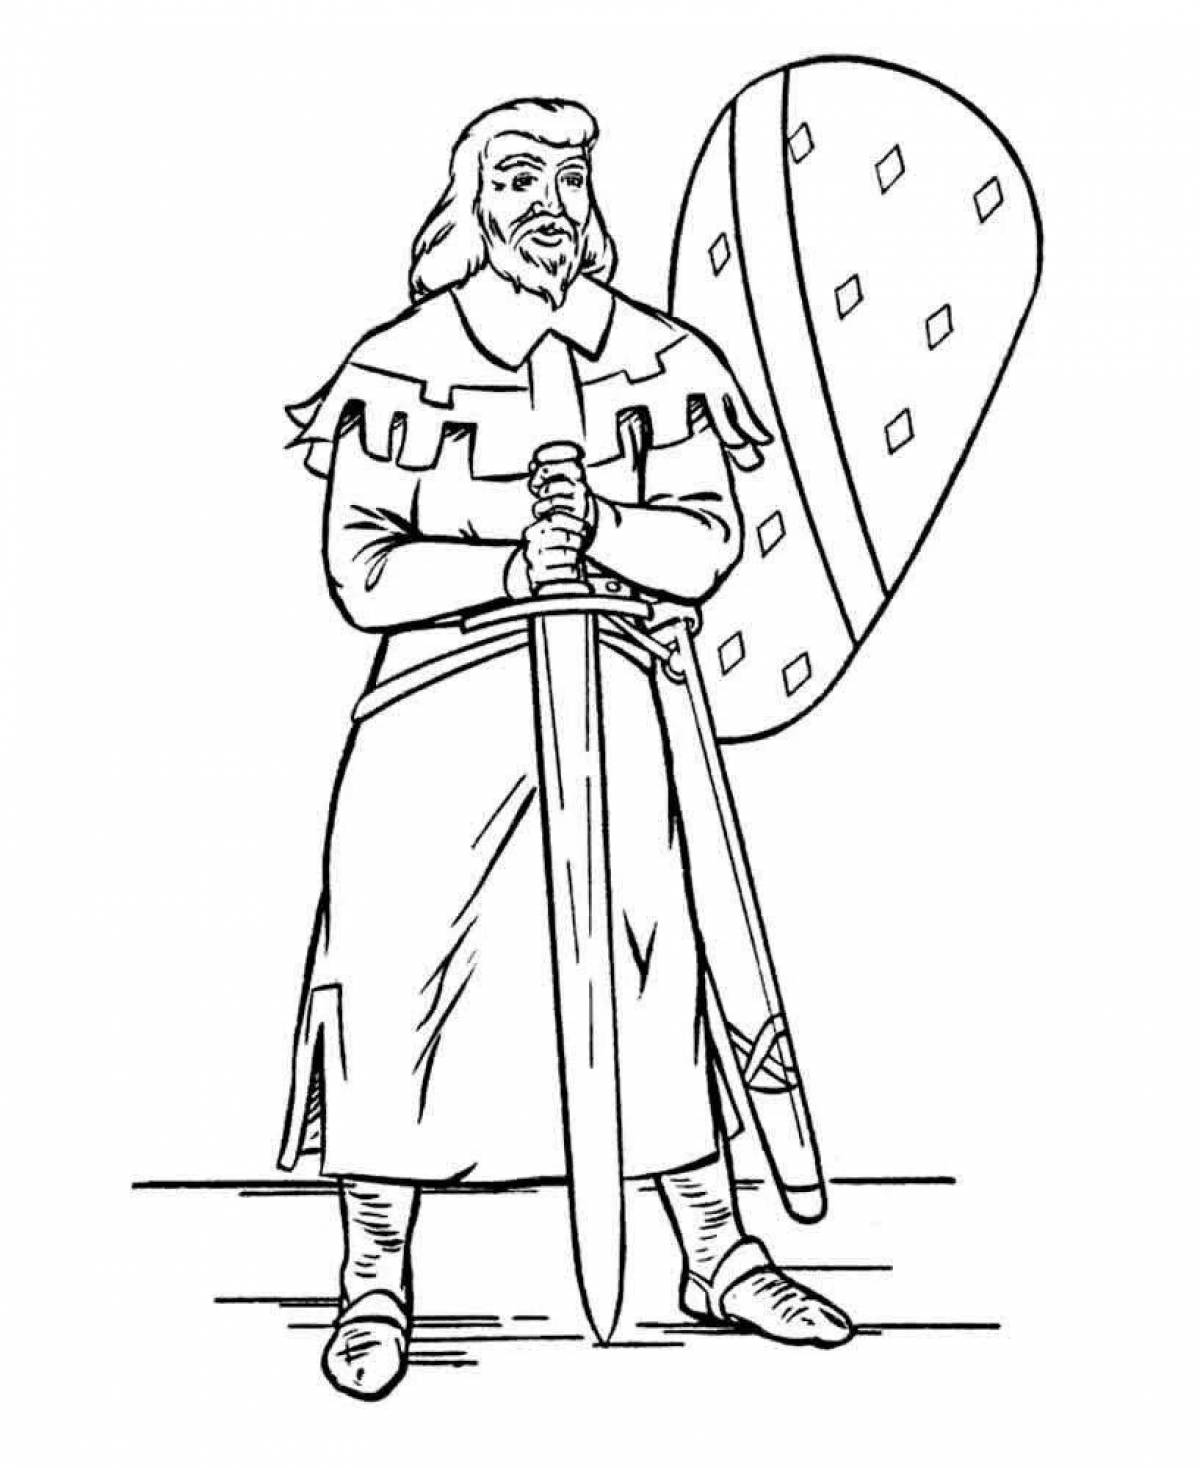 Exalted medieval knights coloring page